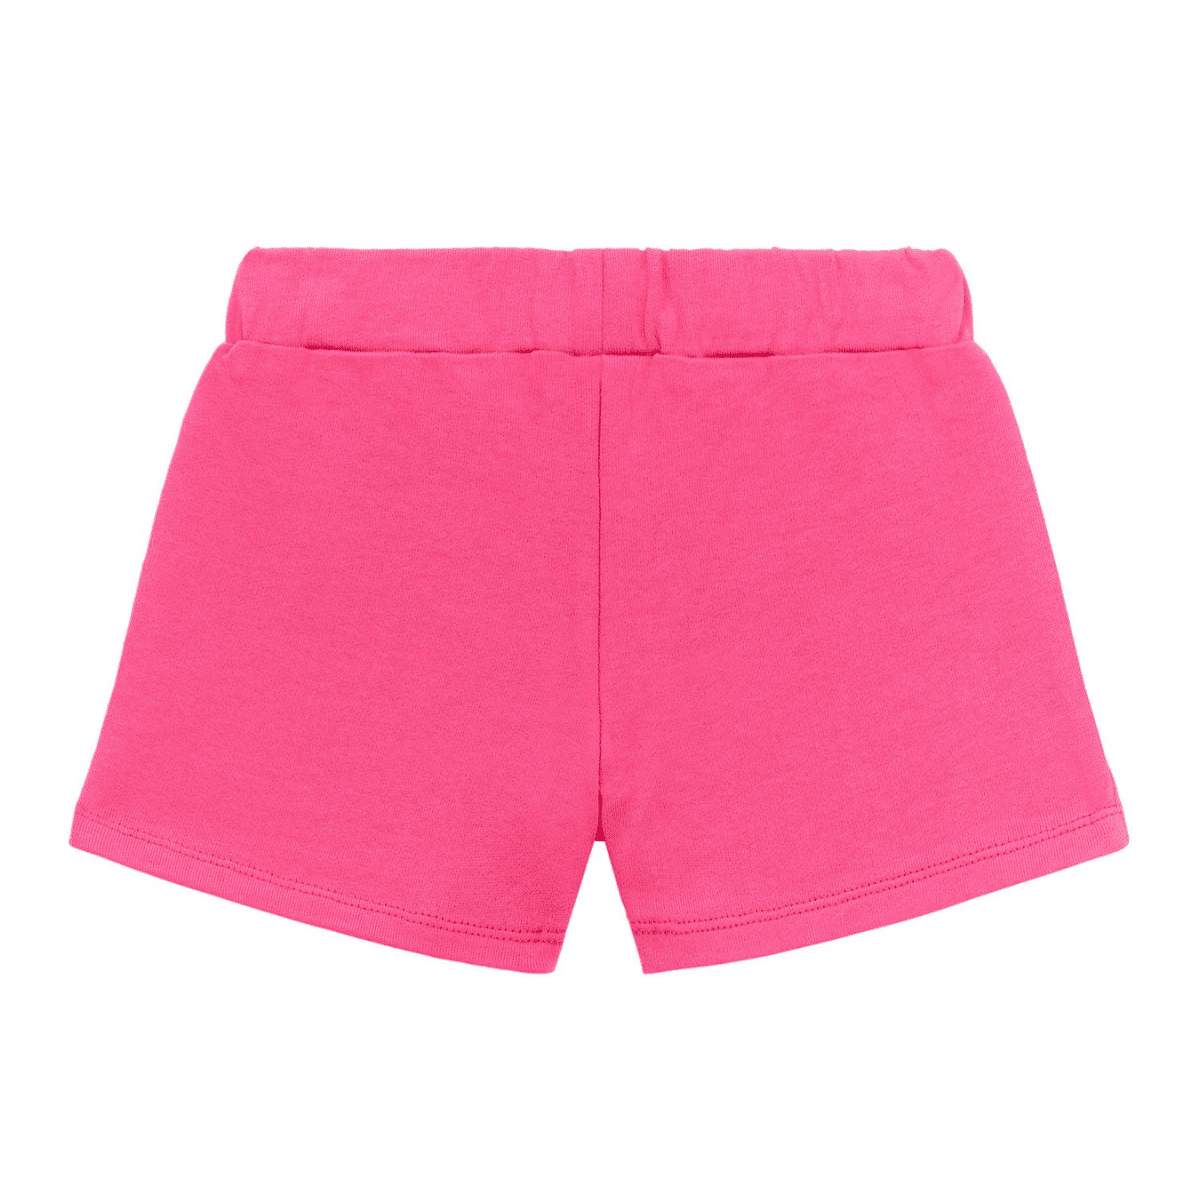 guess girls pink shorts back view